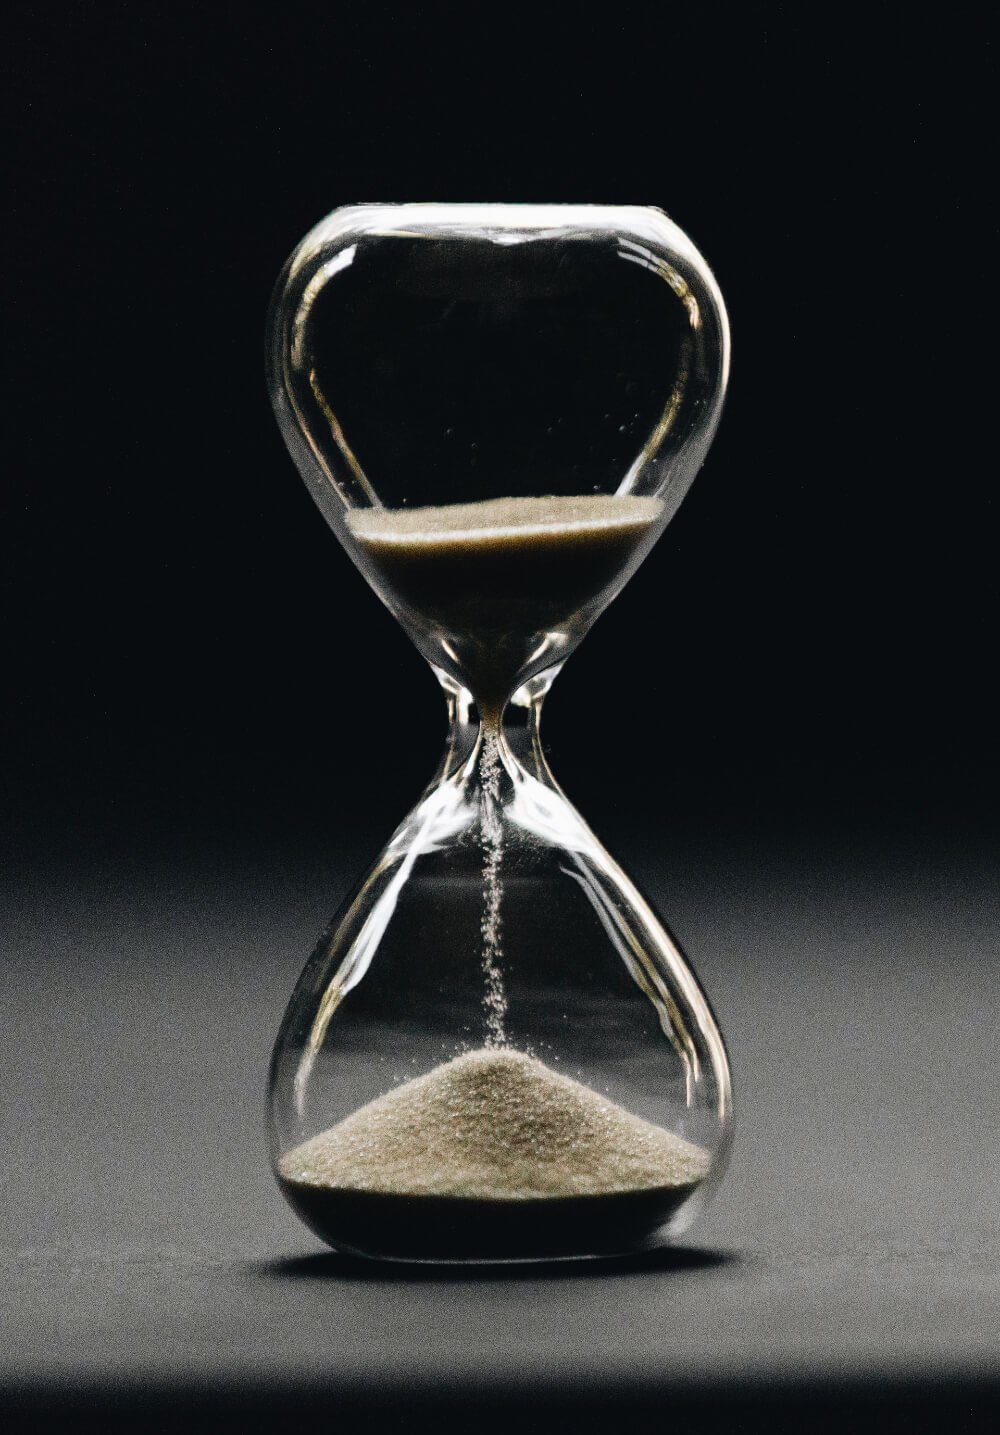 An hourglass showing the passage of time